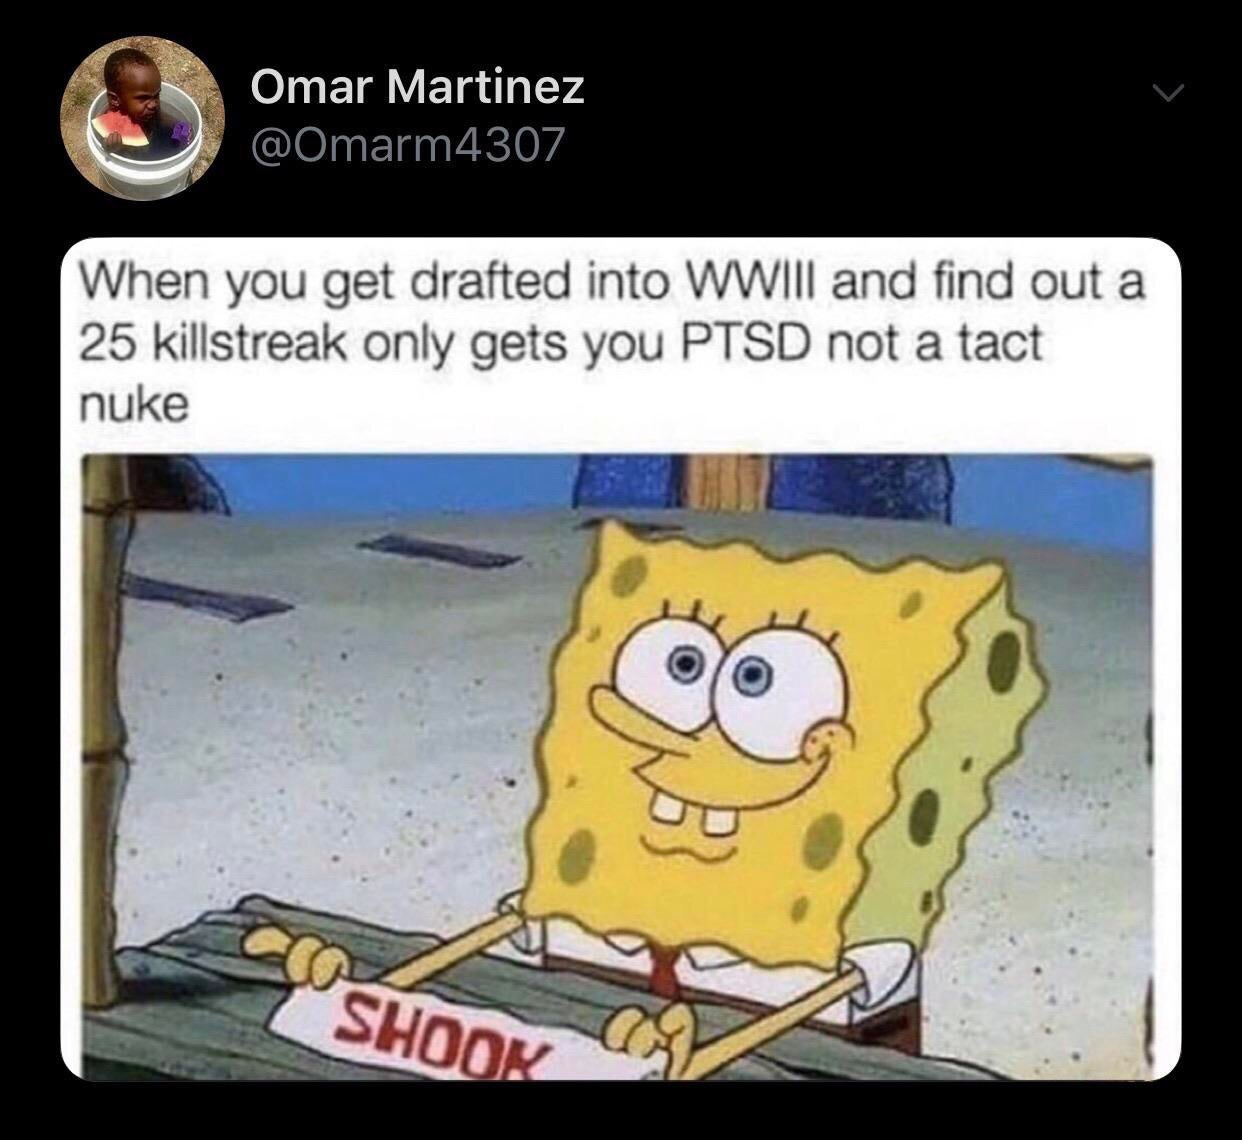 tactical nuke incoming meme - Omar Martinez When you get drafted into Wwiii and find out a 25 killstreak only gets you Ptsd not a tact nuke Shoo!